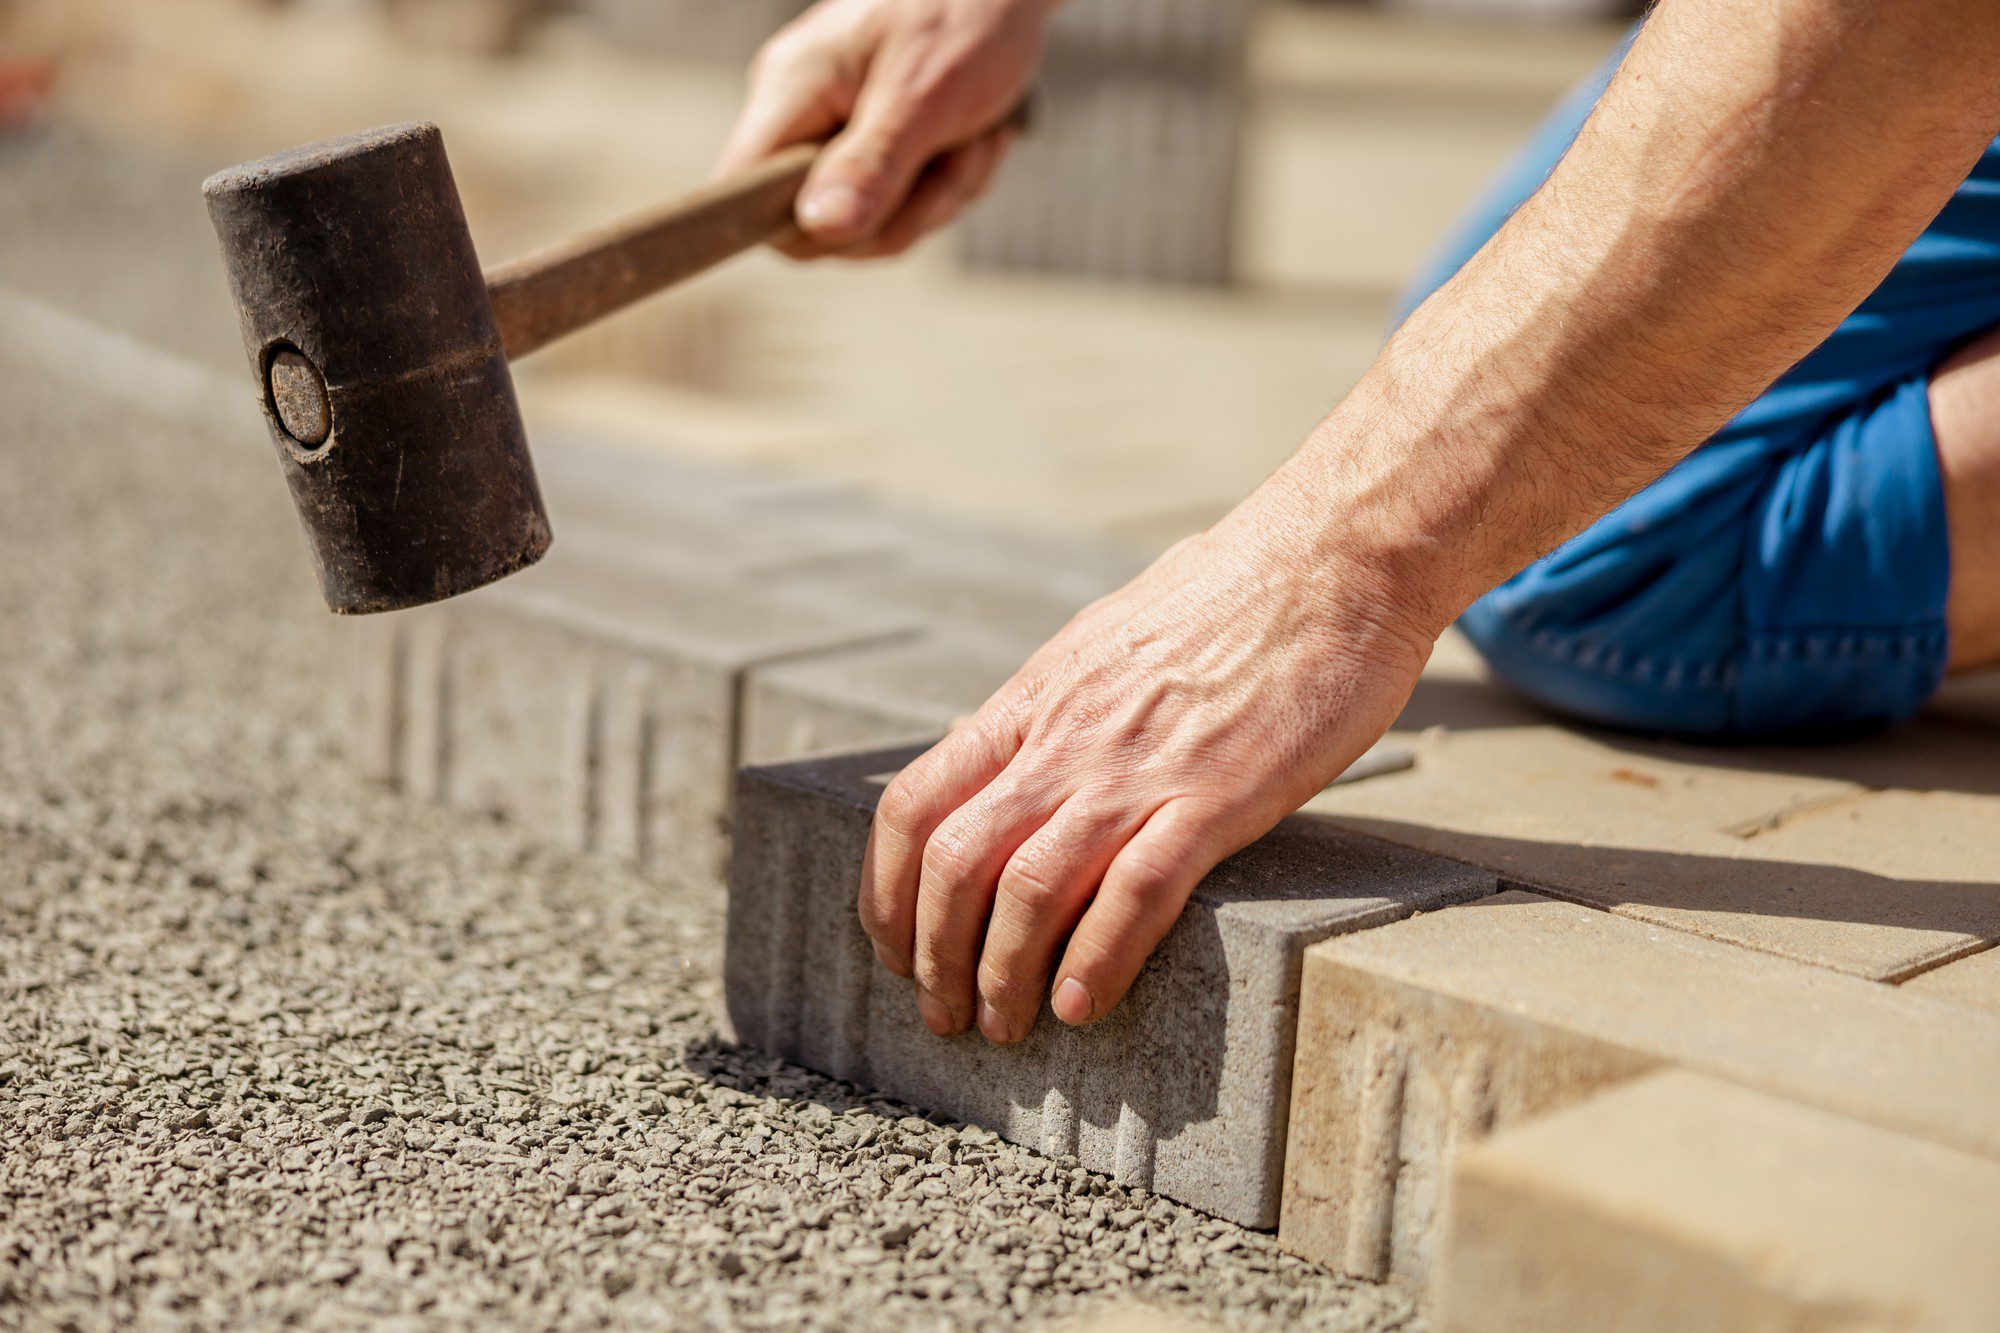 The image shows a person in the process of laying paving stones or bricks, which is typically part of a landscaping, pavement, or construction project. The individual is using a rubber mallet to tap a brick into place, ensuring that it is properly set on what appears to be a bed of crushed stone or sand, which is common practise for creating a stable base. You can see the person's hands gripping the brick and the mallet, indicating they are actively engaged in the task. The person is likely dressed in casual work attire suitable for physical outdoor labour, as suggested by the blue clothing visible in the image.